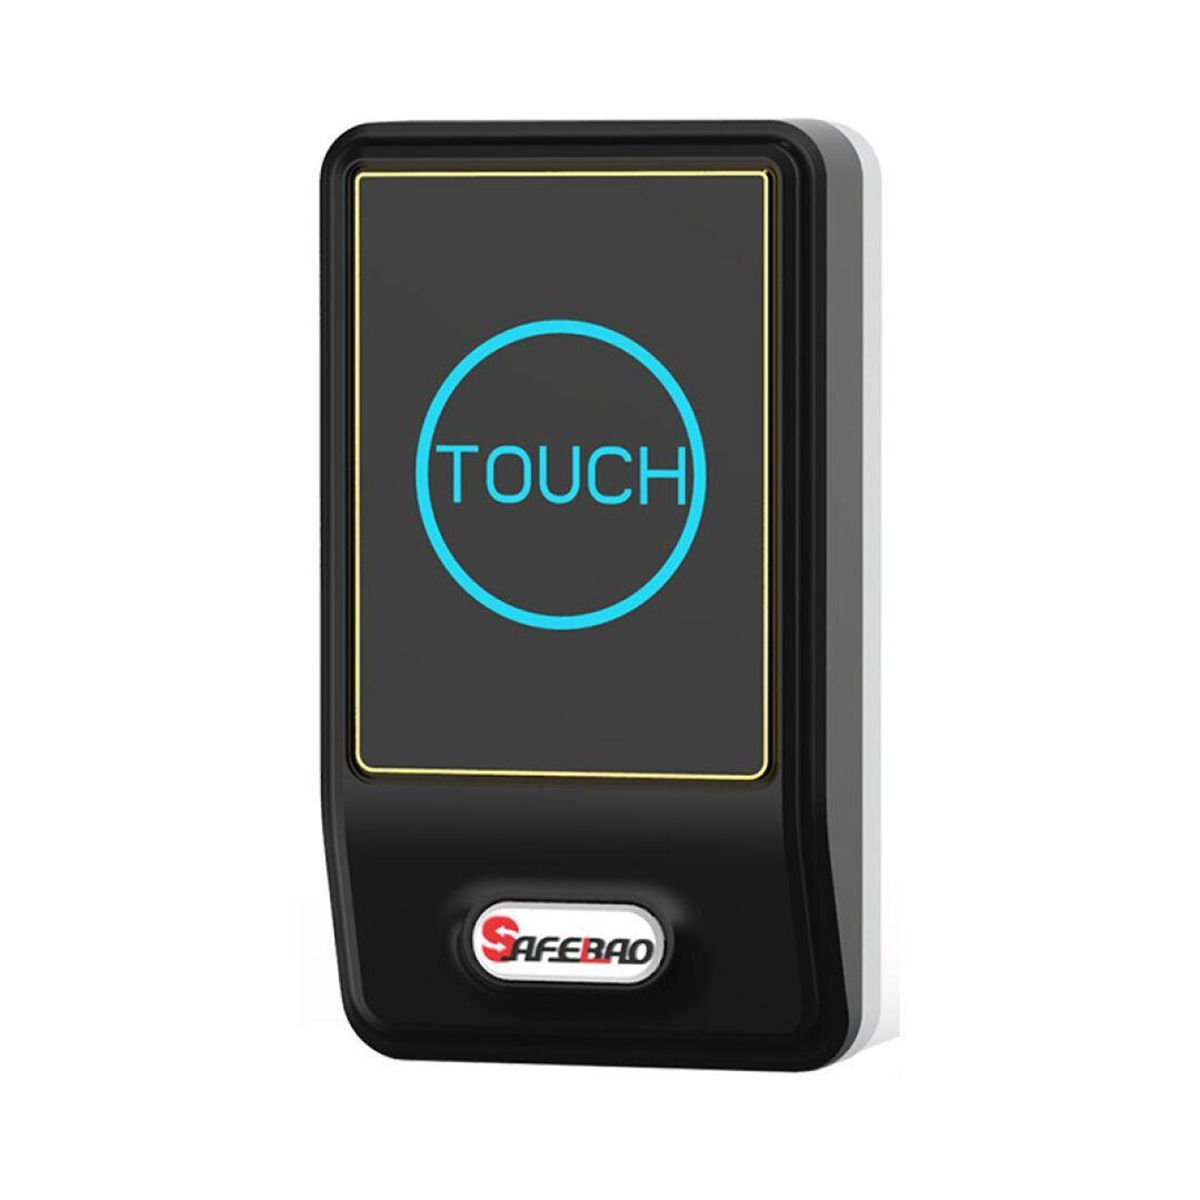 Waterproof-Home-Wireless-Doorbell-Touch-Gate-Security-Entry-Sensor-Front-Entry-1299319